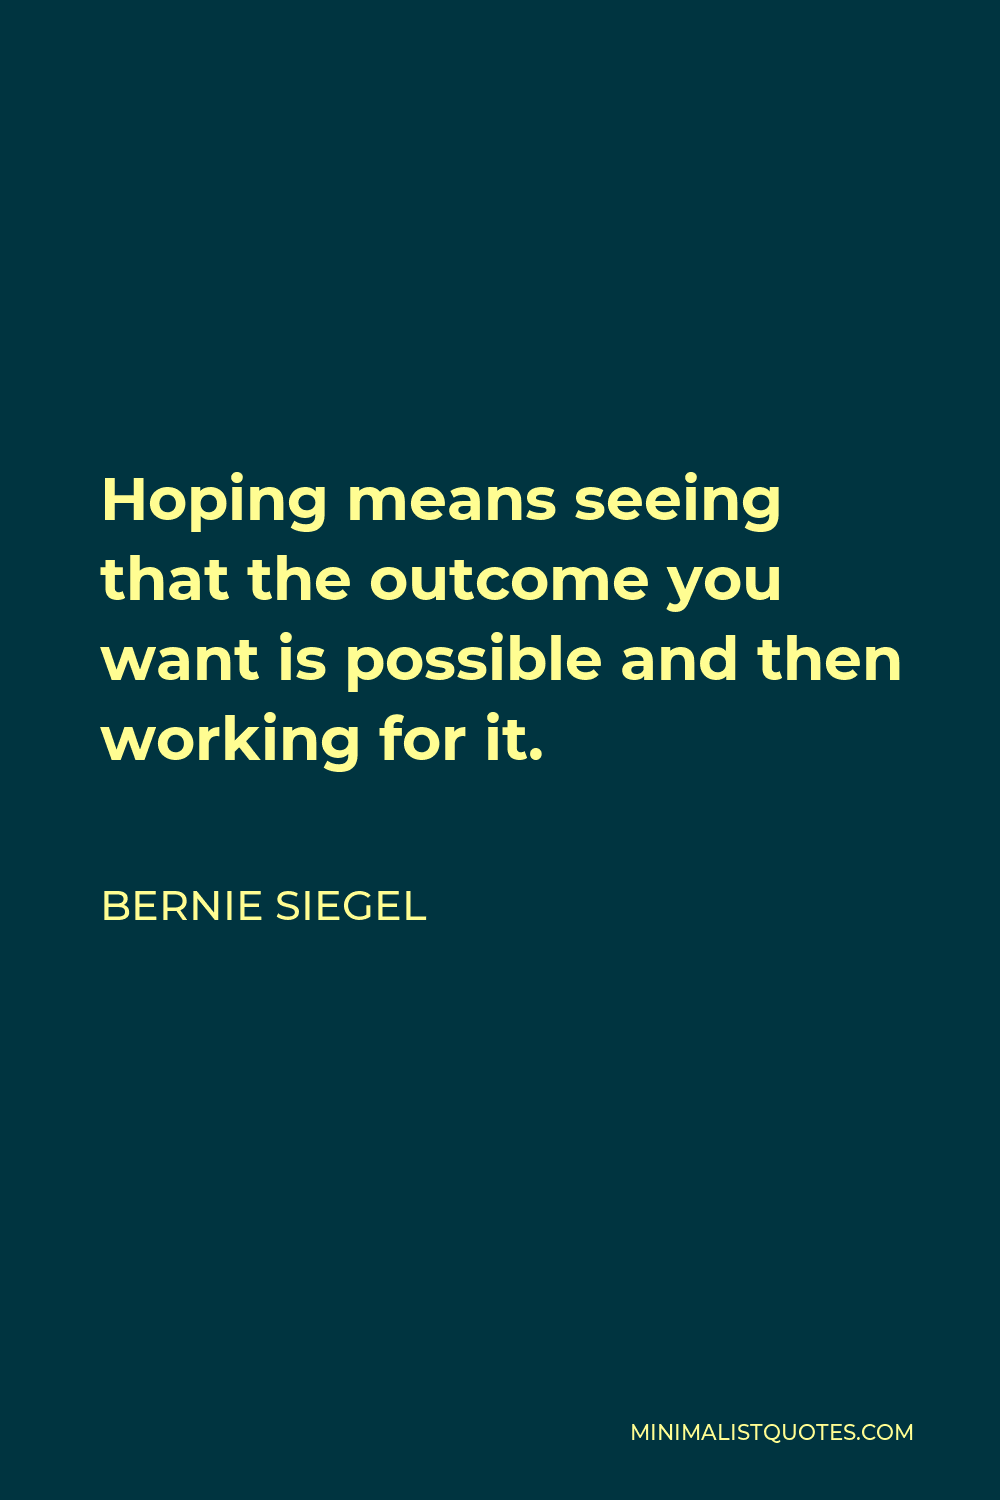 Bernie Siegel Quote - Hoping means seeing that the outcome you want is possible and then working for it.